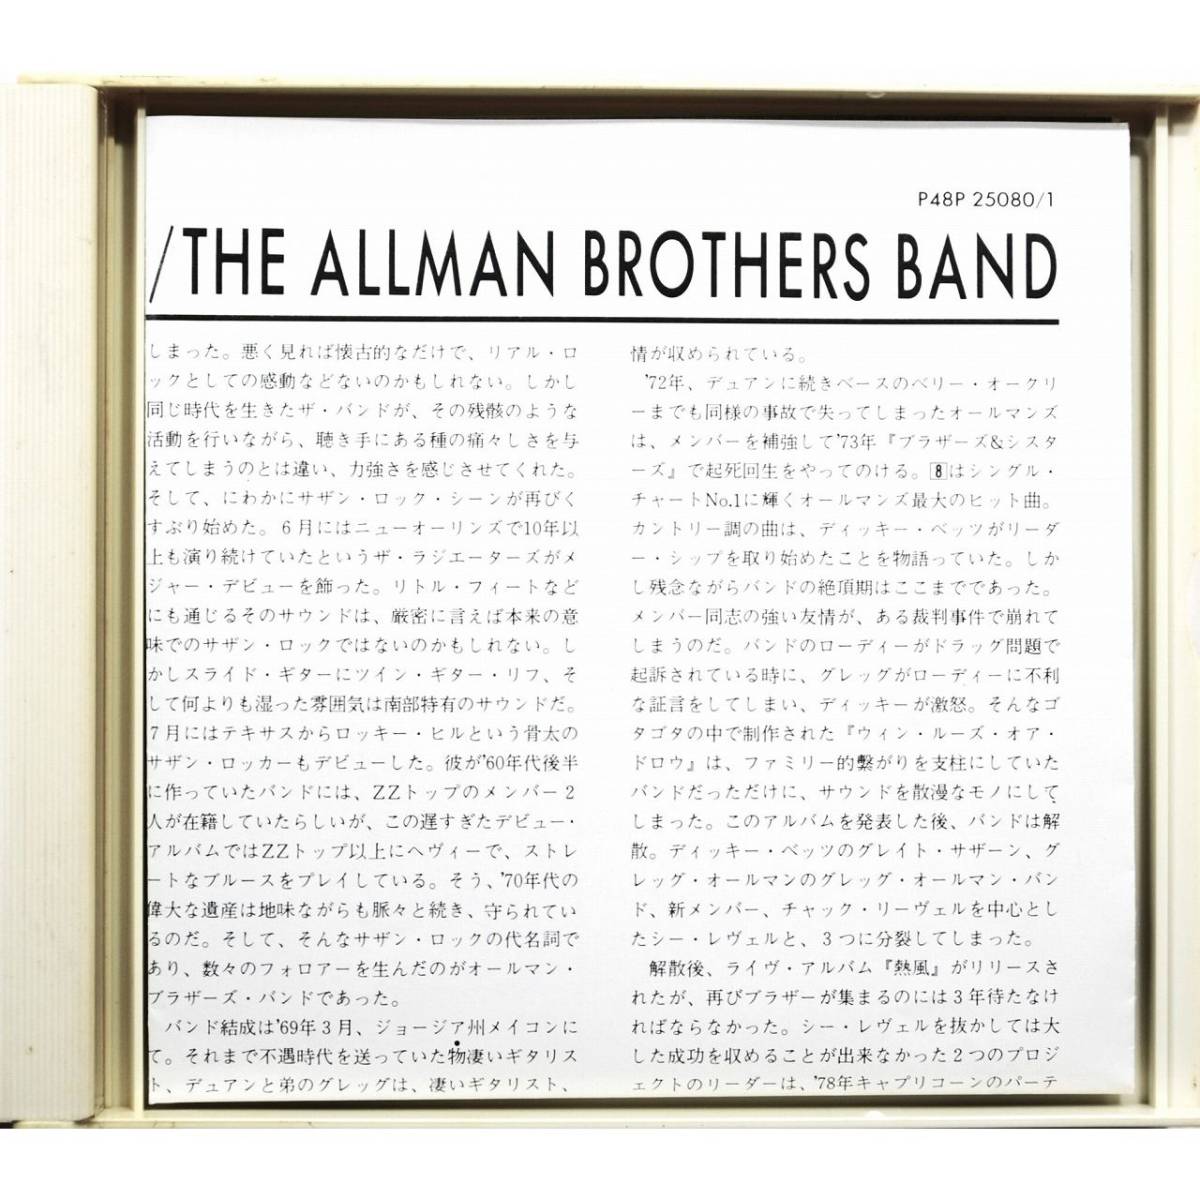 【2CD】The Allman Brothers Band / The Road Goes On Forever ◇ オールマン・ブラザーズ・バンド ◇ 栄光への道のり ◇ 国内盤 ◇_画像3